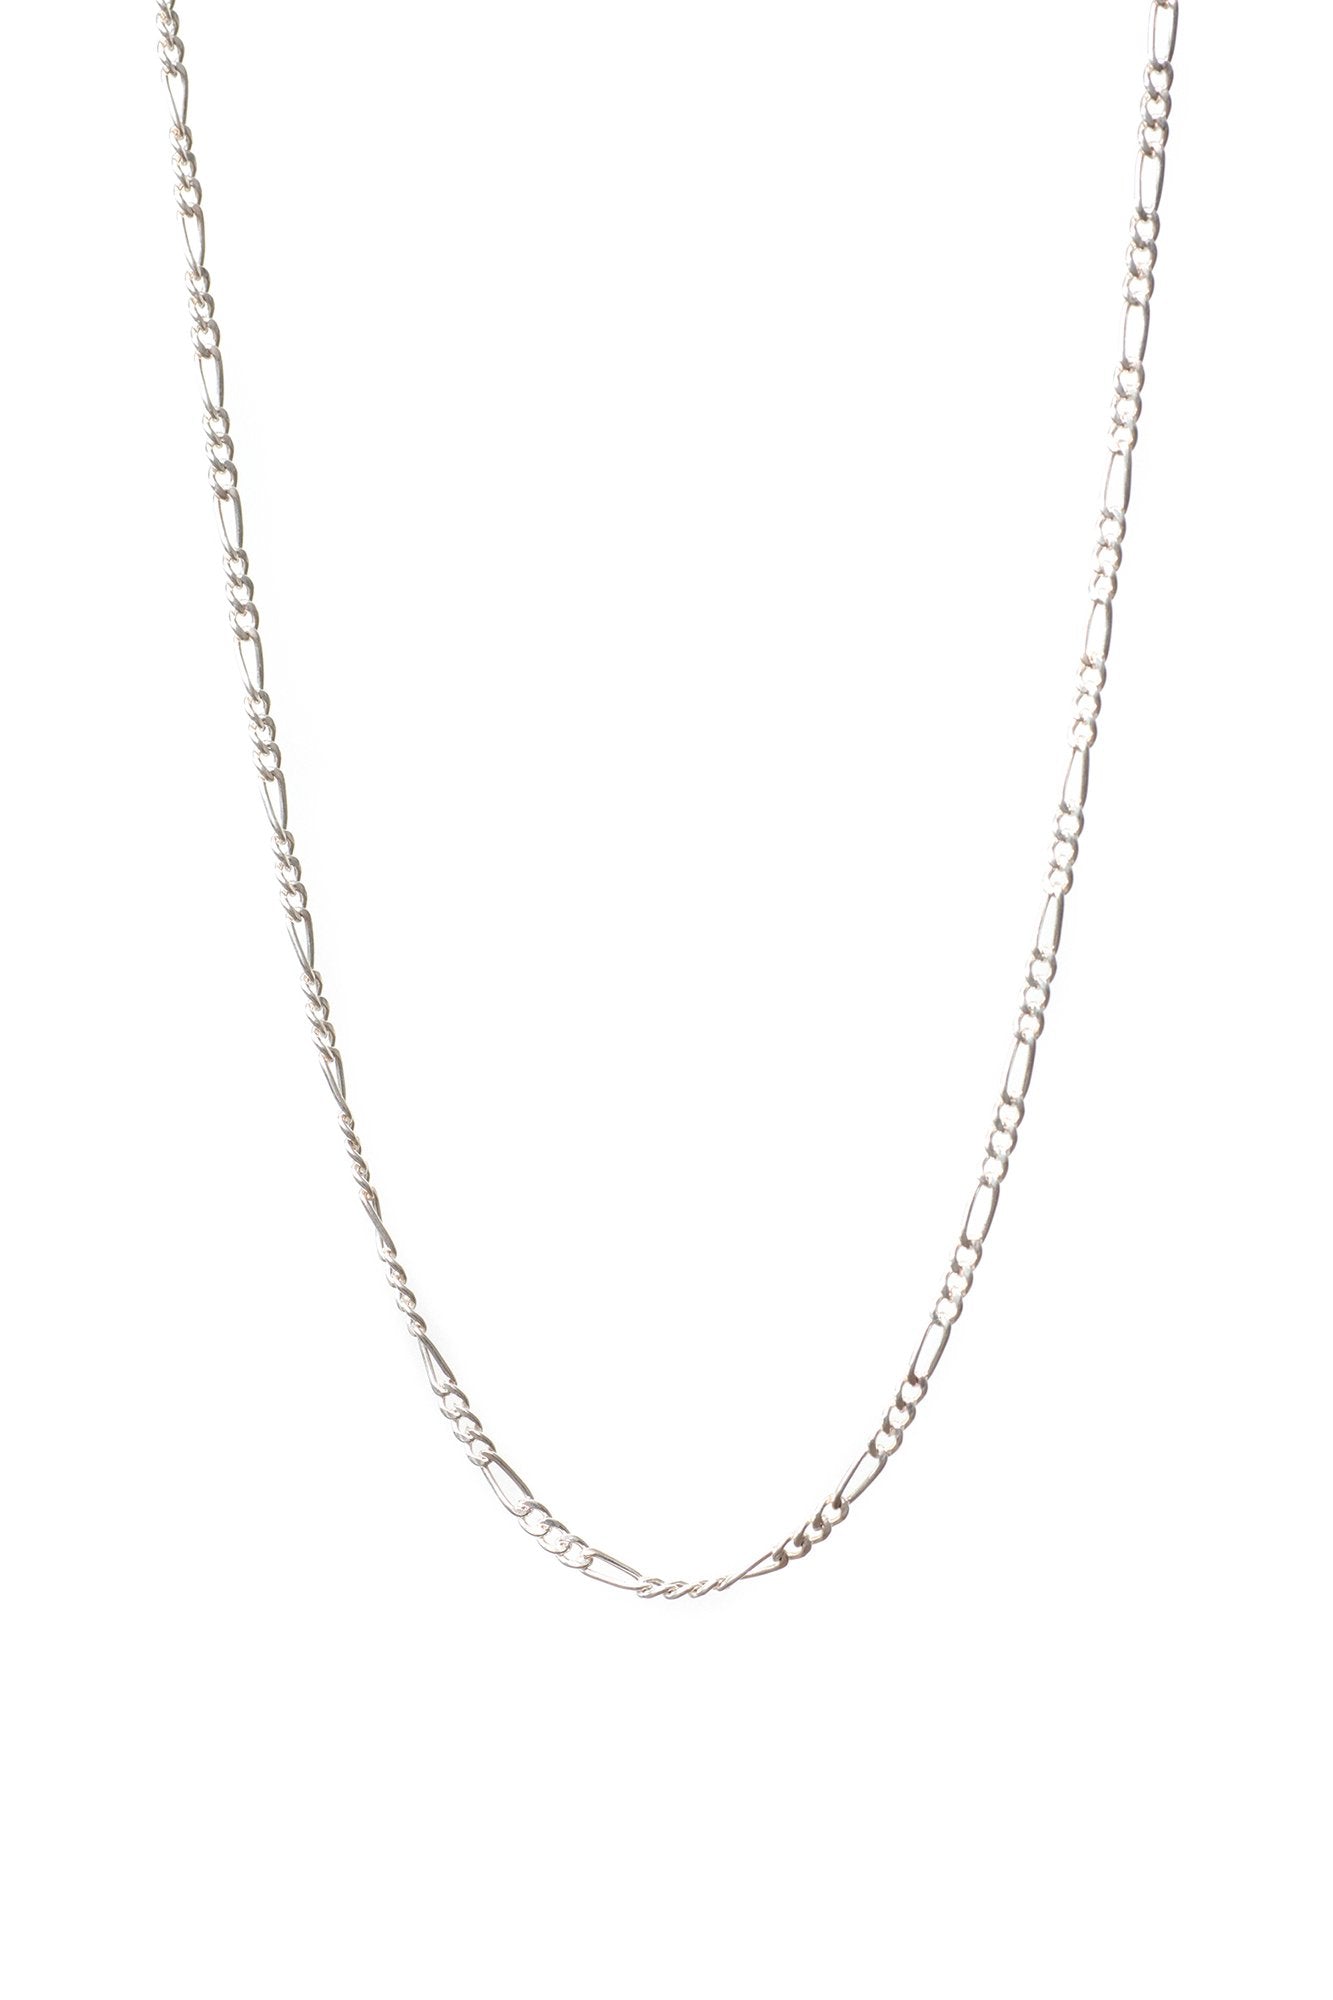 Lisbeth Augustine Necklace | Sterling Silver